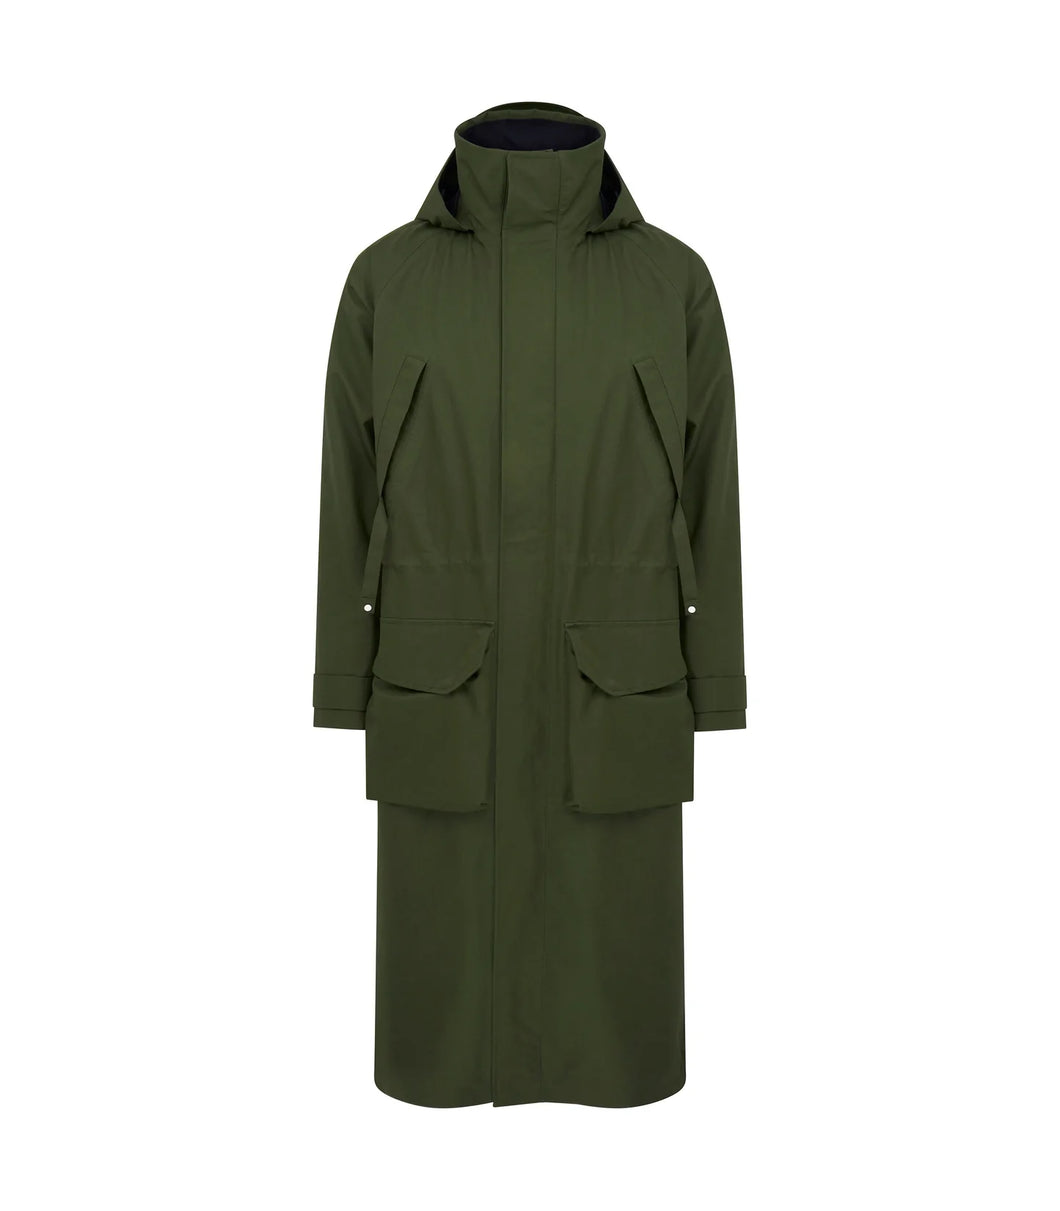 Unisex Technical Vatersay Sporting Cape In Rifle Green